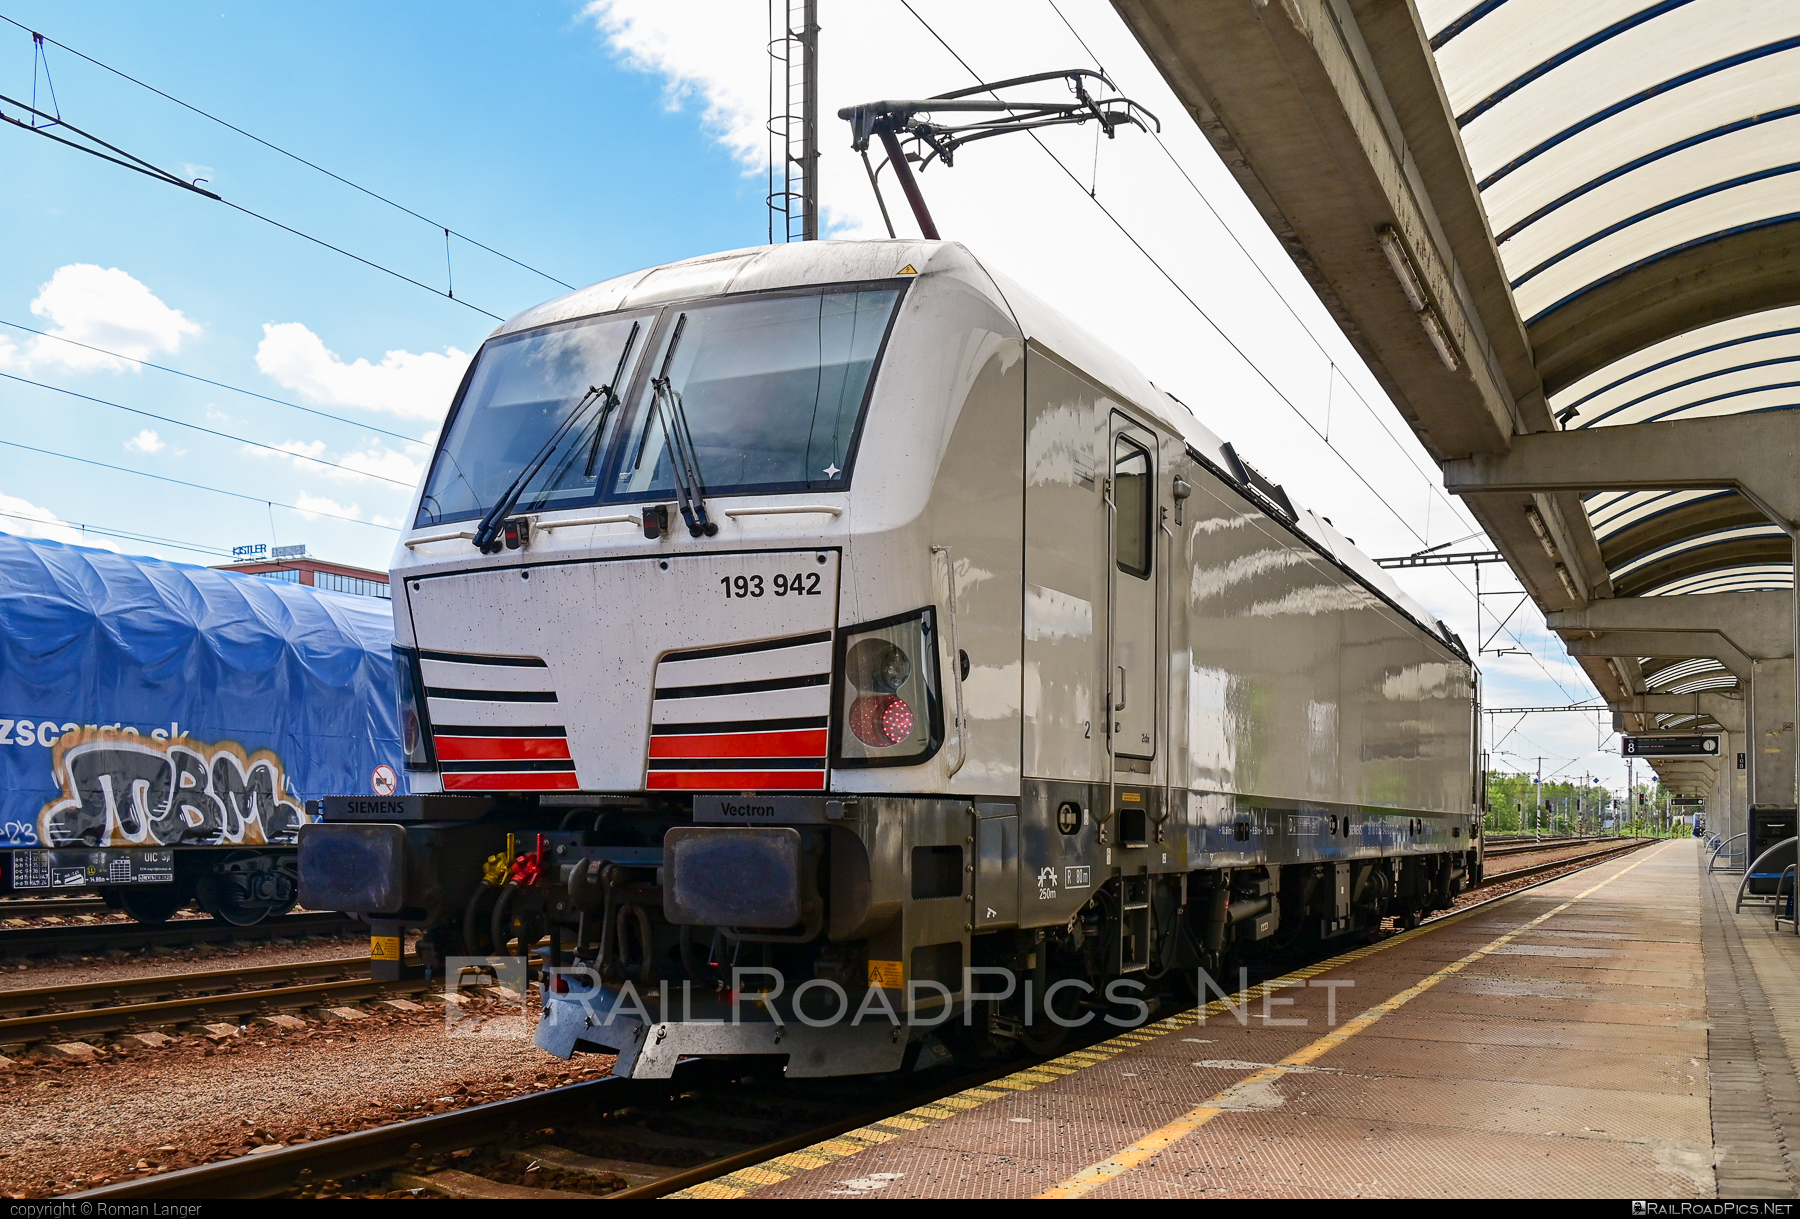 Siemens Vectron MS - 193 942 operated by FRACHTbahn Traktion GmbH #ell #ellgermany #eloc #europeanlocomotiveleasing #frachtbahn #frachtbahntraktion #frachtbahntraktiongmbh #siemens #siemensVectron #siemensVectronMS #vectron #vectronMS